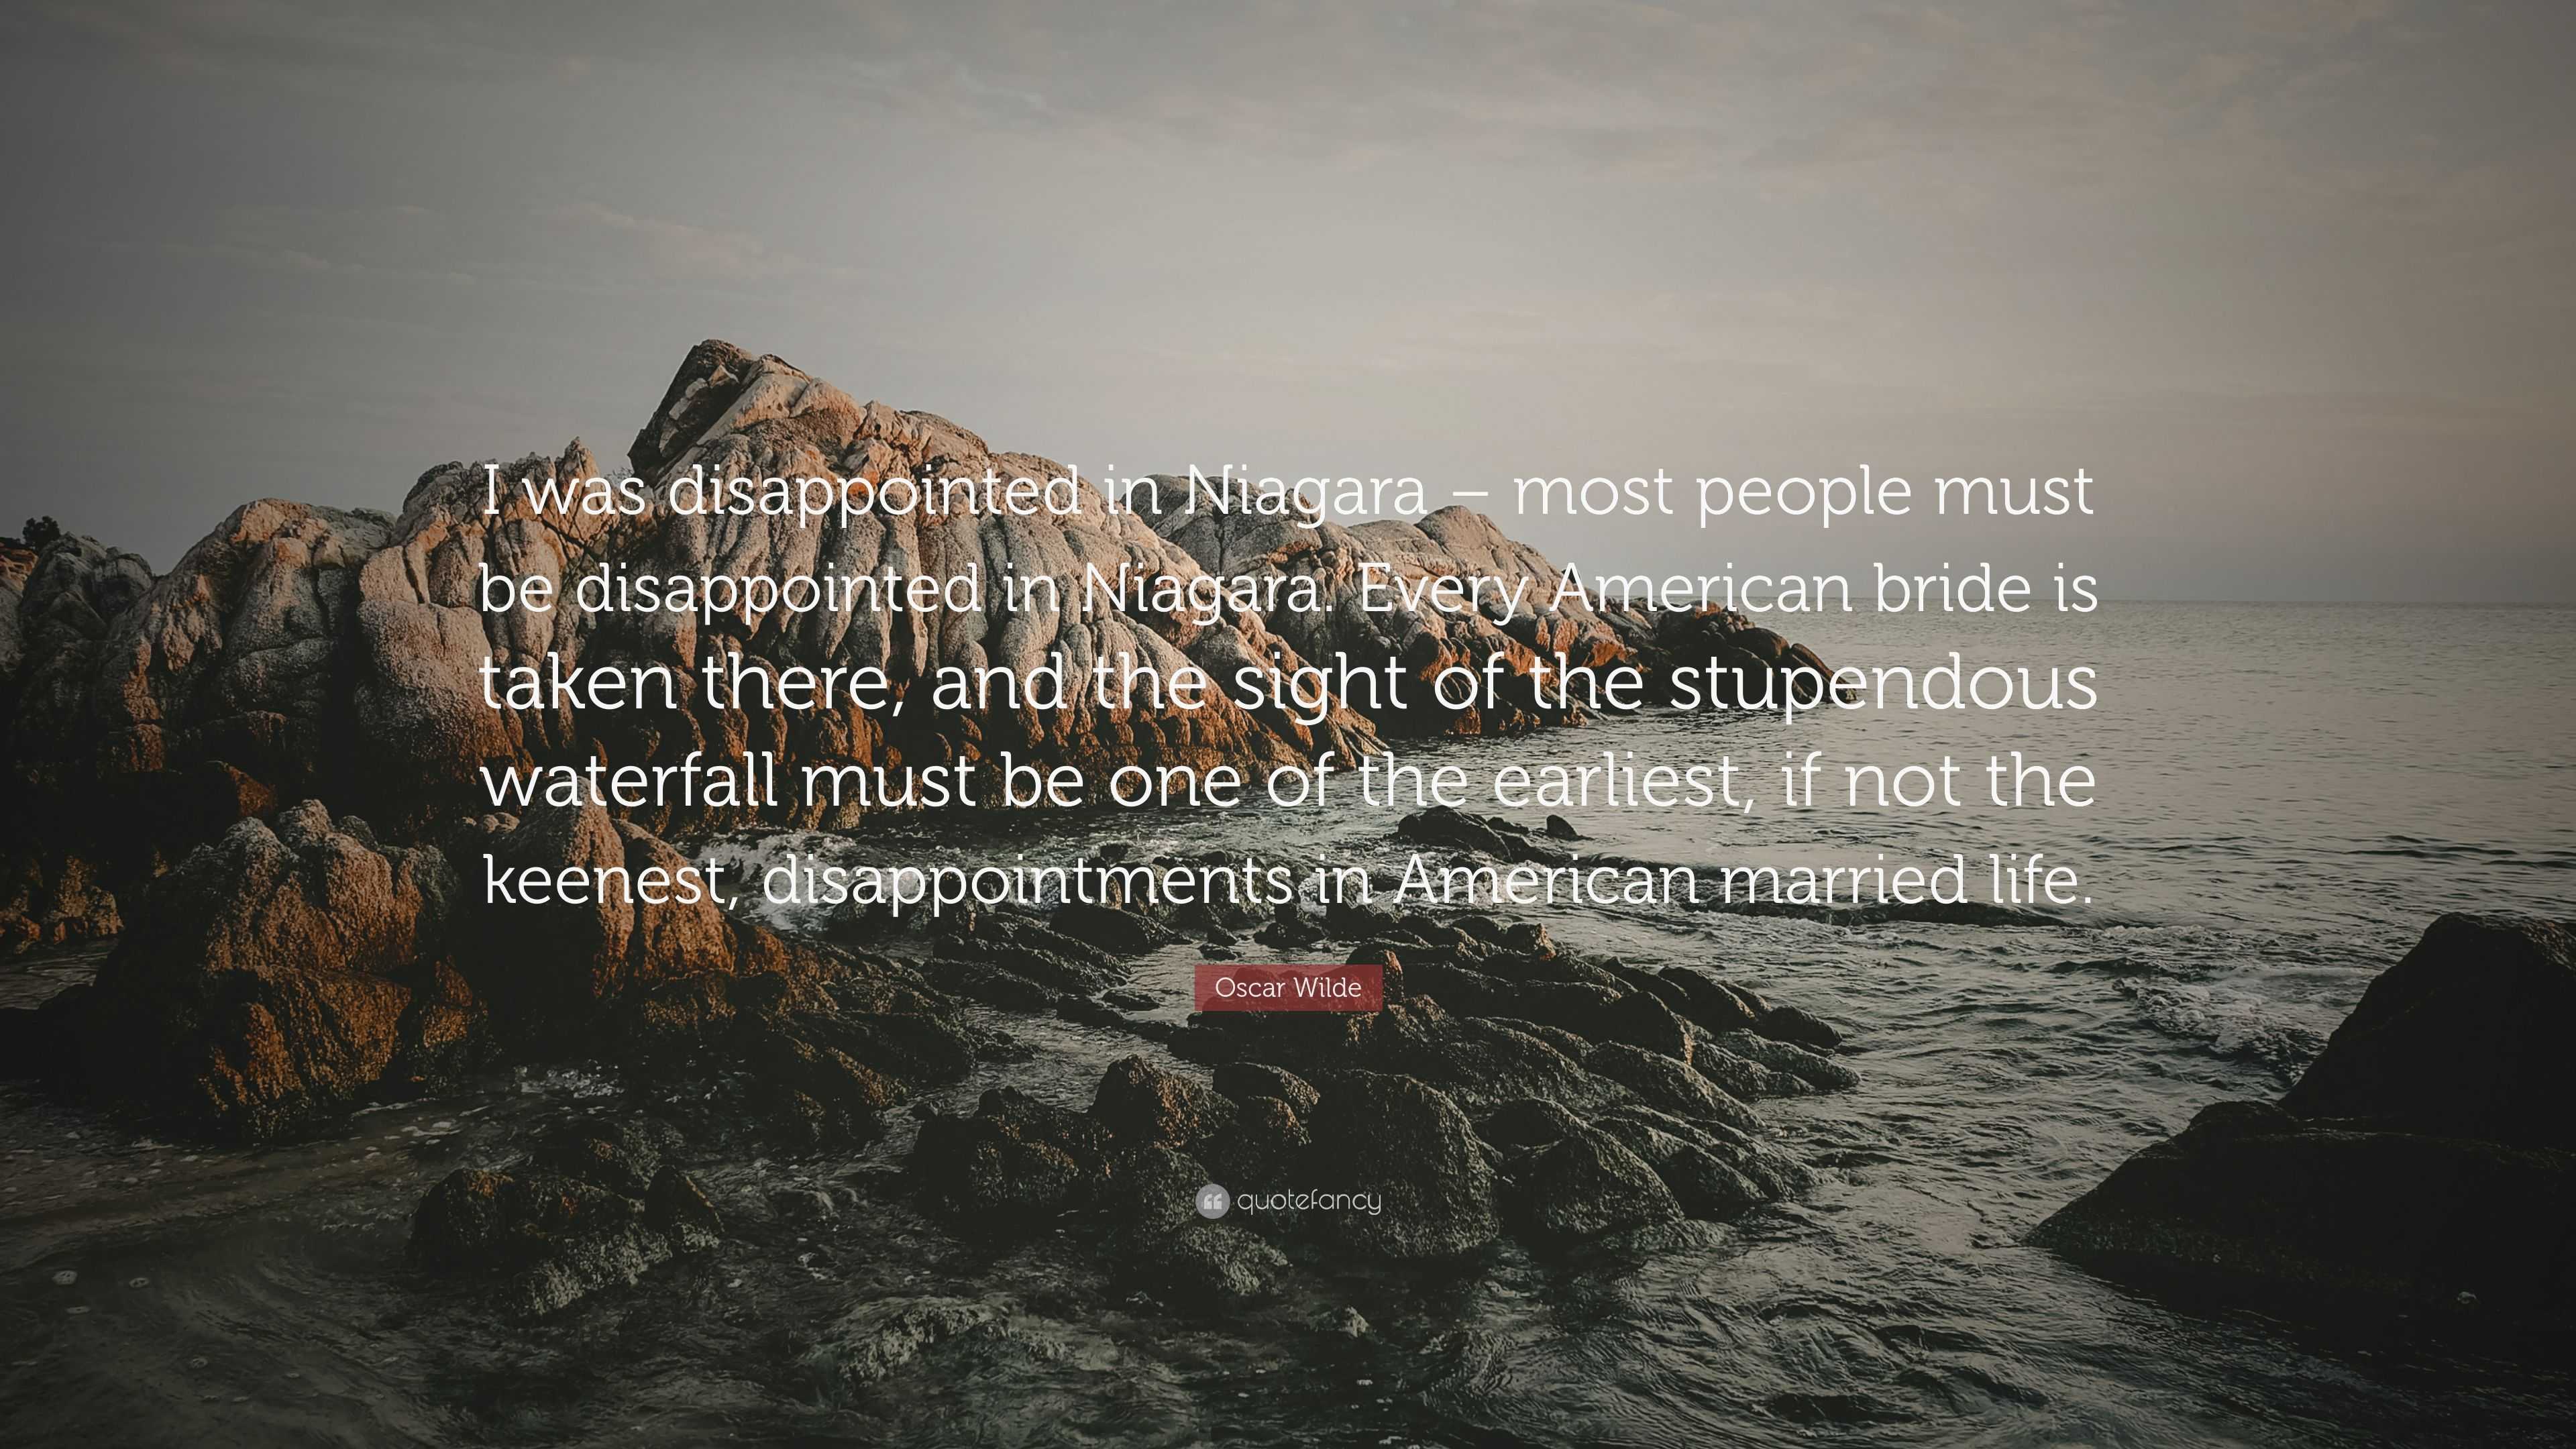 Oscar Wilde Quote: “I Was Disappointed In Niagara – Most People Must Be  Disappointed In Niagara. Every American Bride Is Taken There, And Th...”